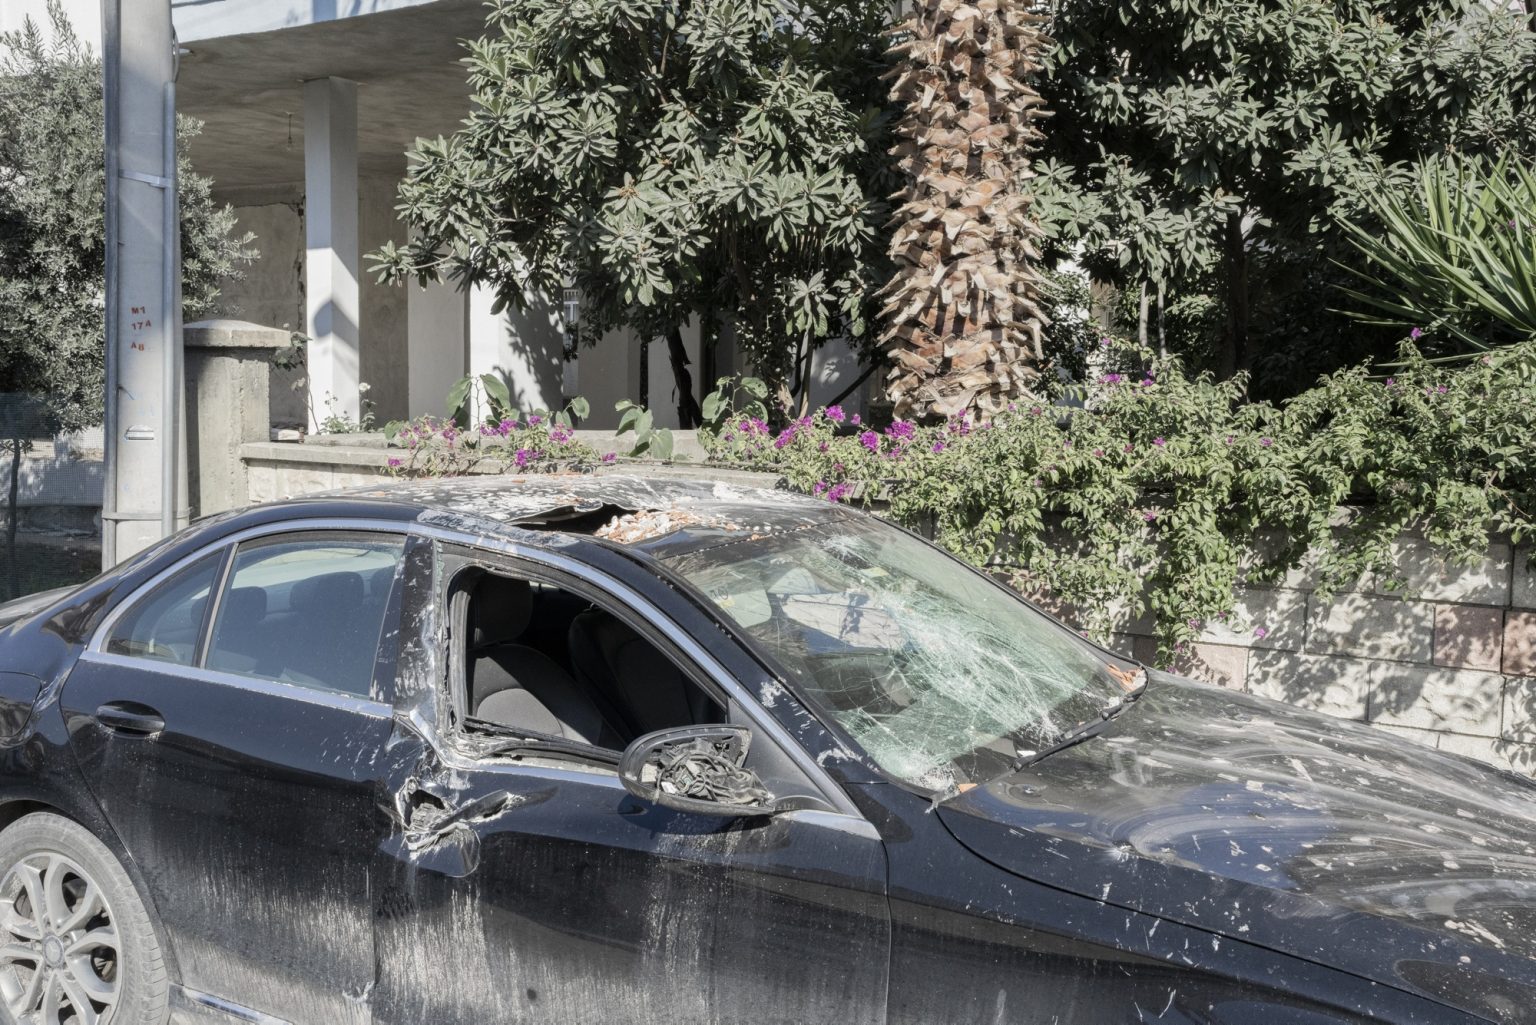 Osmaniye, Turkey, February 2023 - The aftermath of the earthquake that hit southern Turkey and northern Syria.    A car damaged by the earthquake. ><
Osmaniye, Turchia, febbraio 2023  Le conseguenze del terremoto che ha colpito la Turchia del Sud e la Siria del nord.